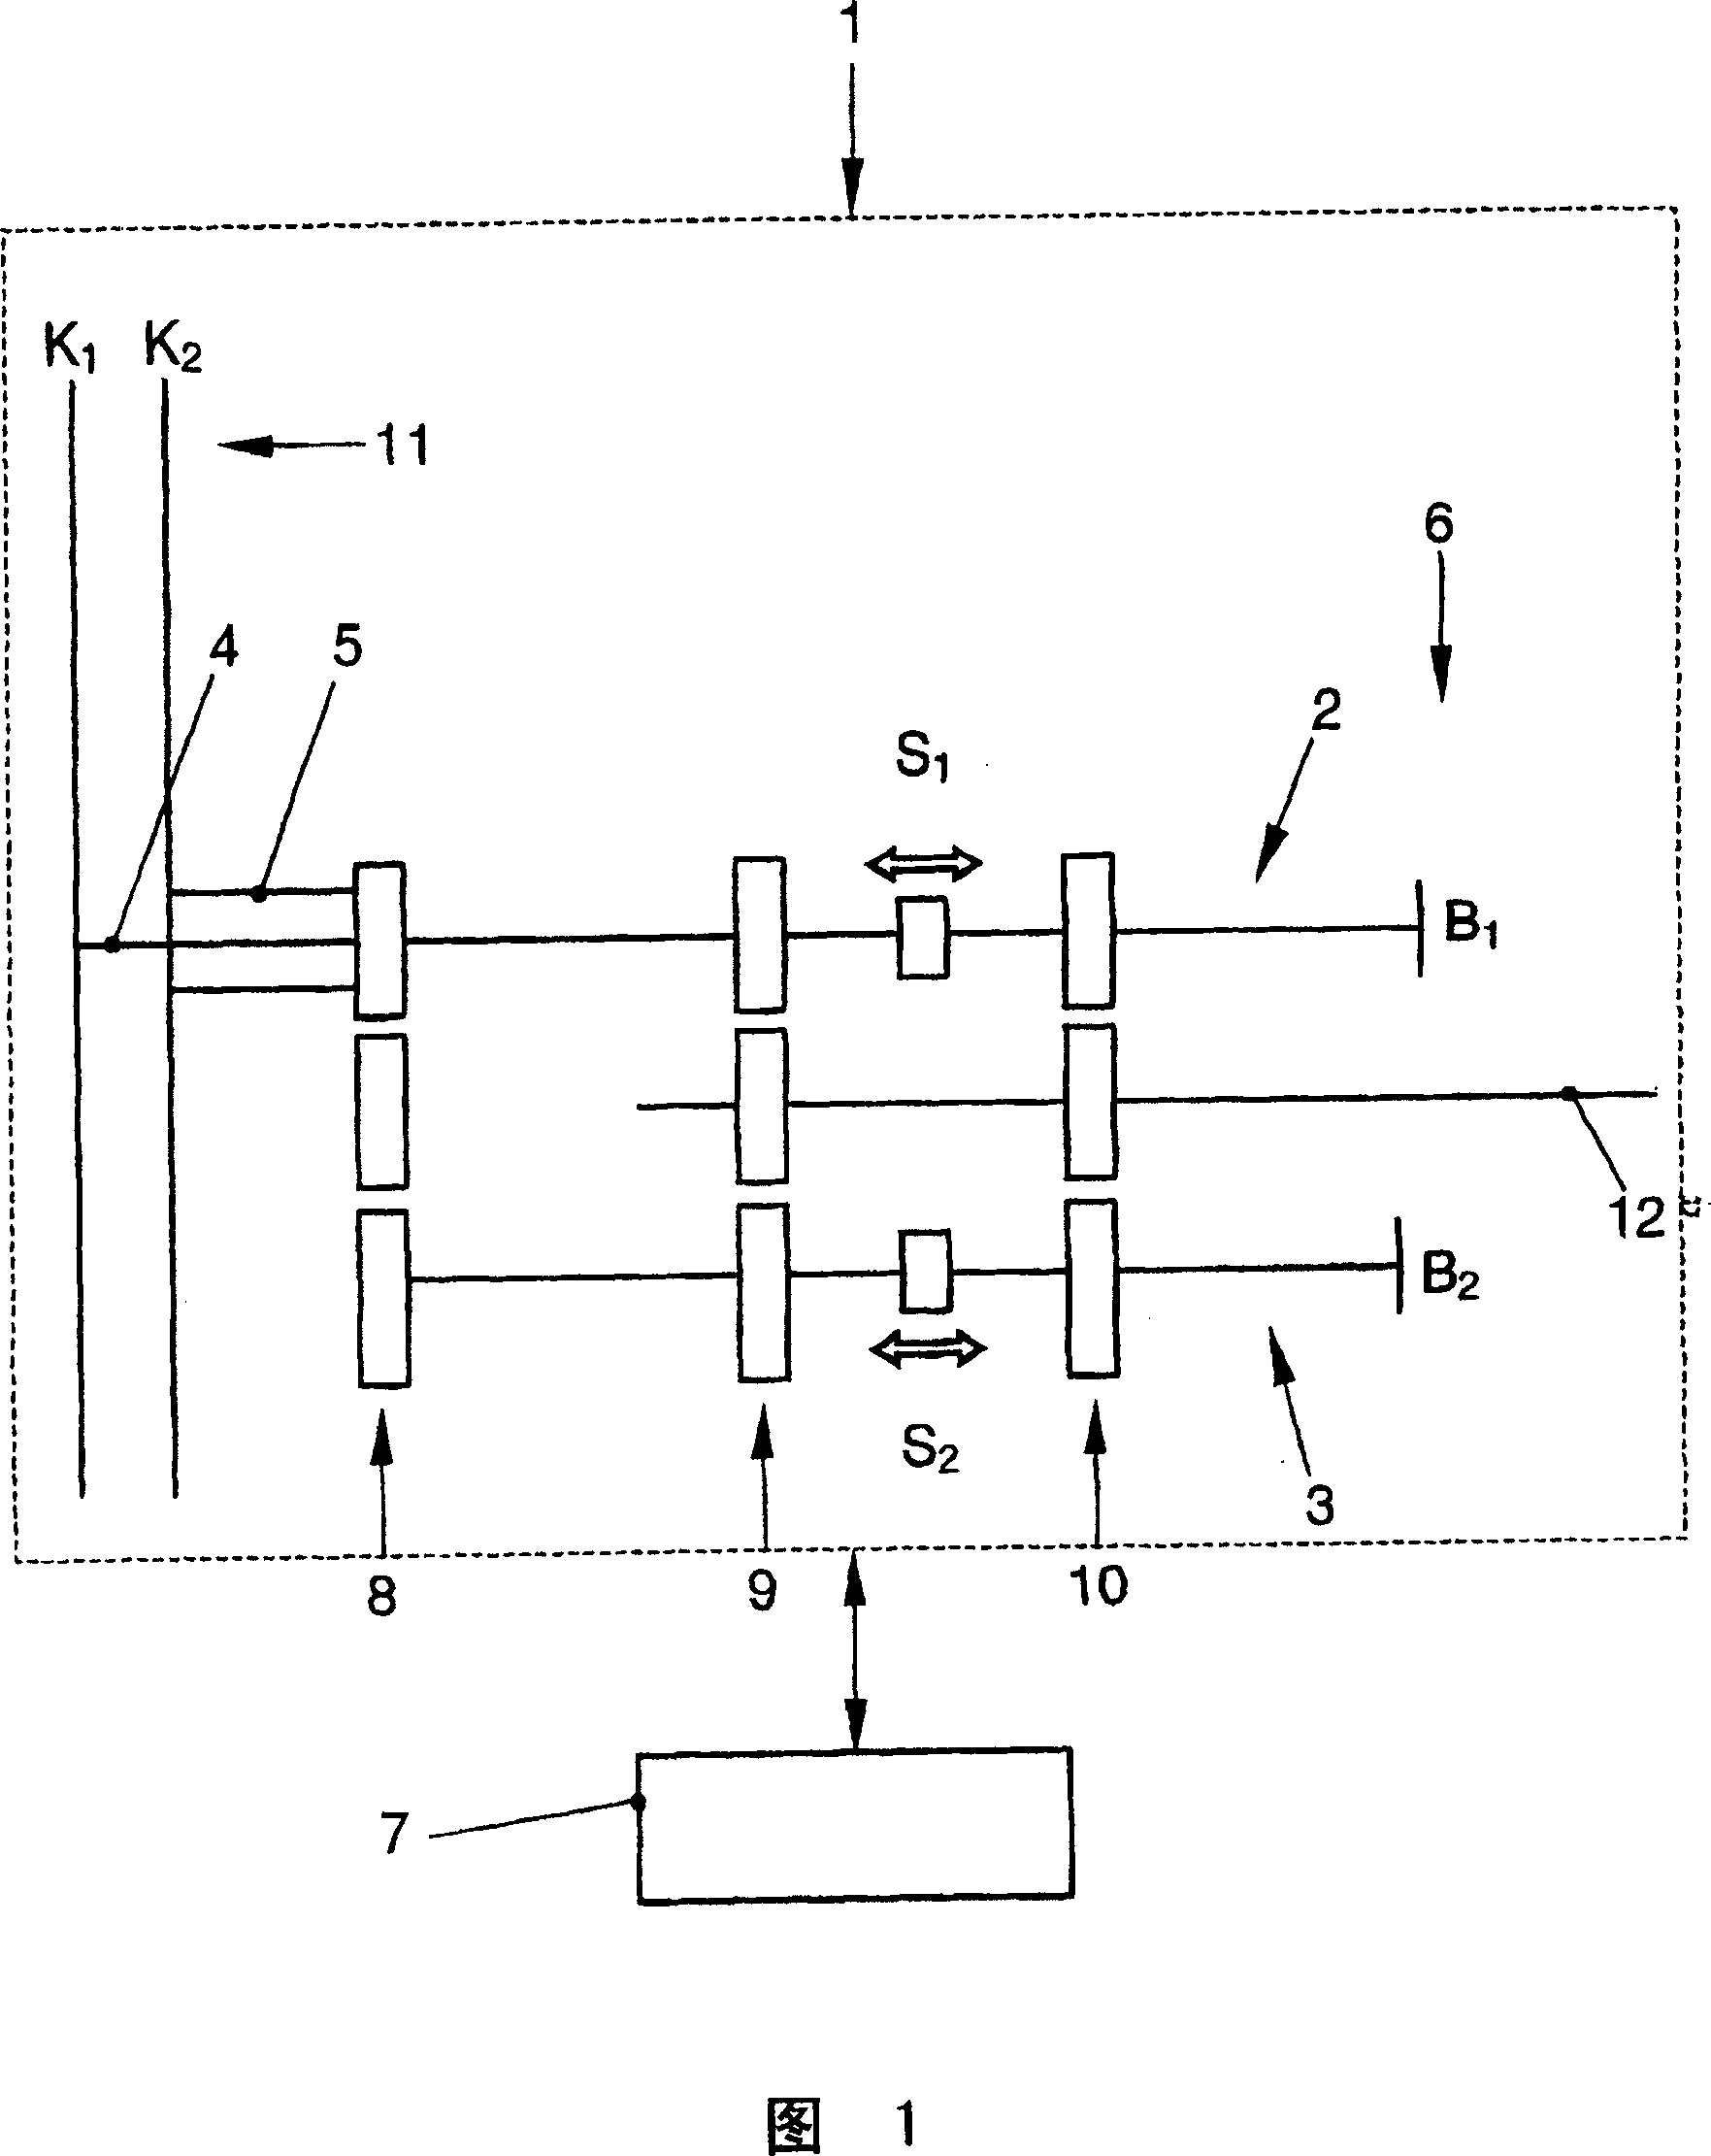 Synchronous device for double clutch speed variator